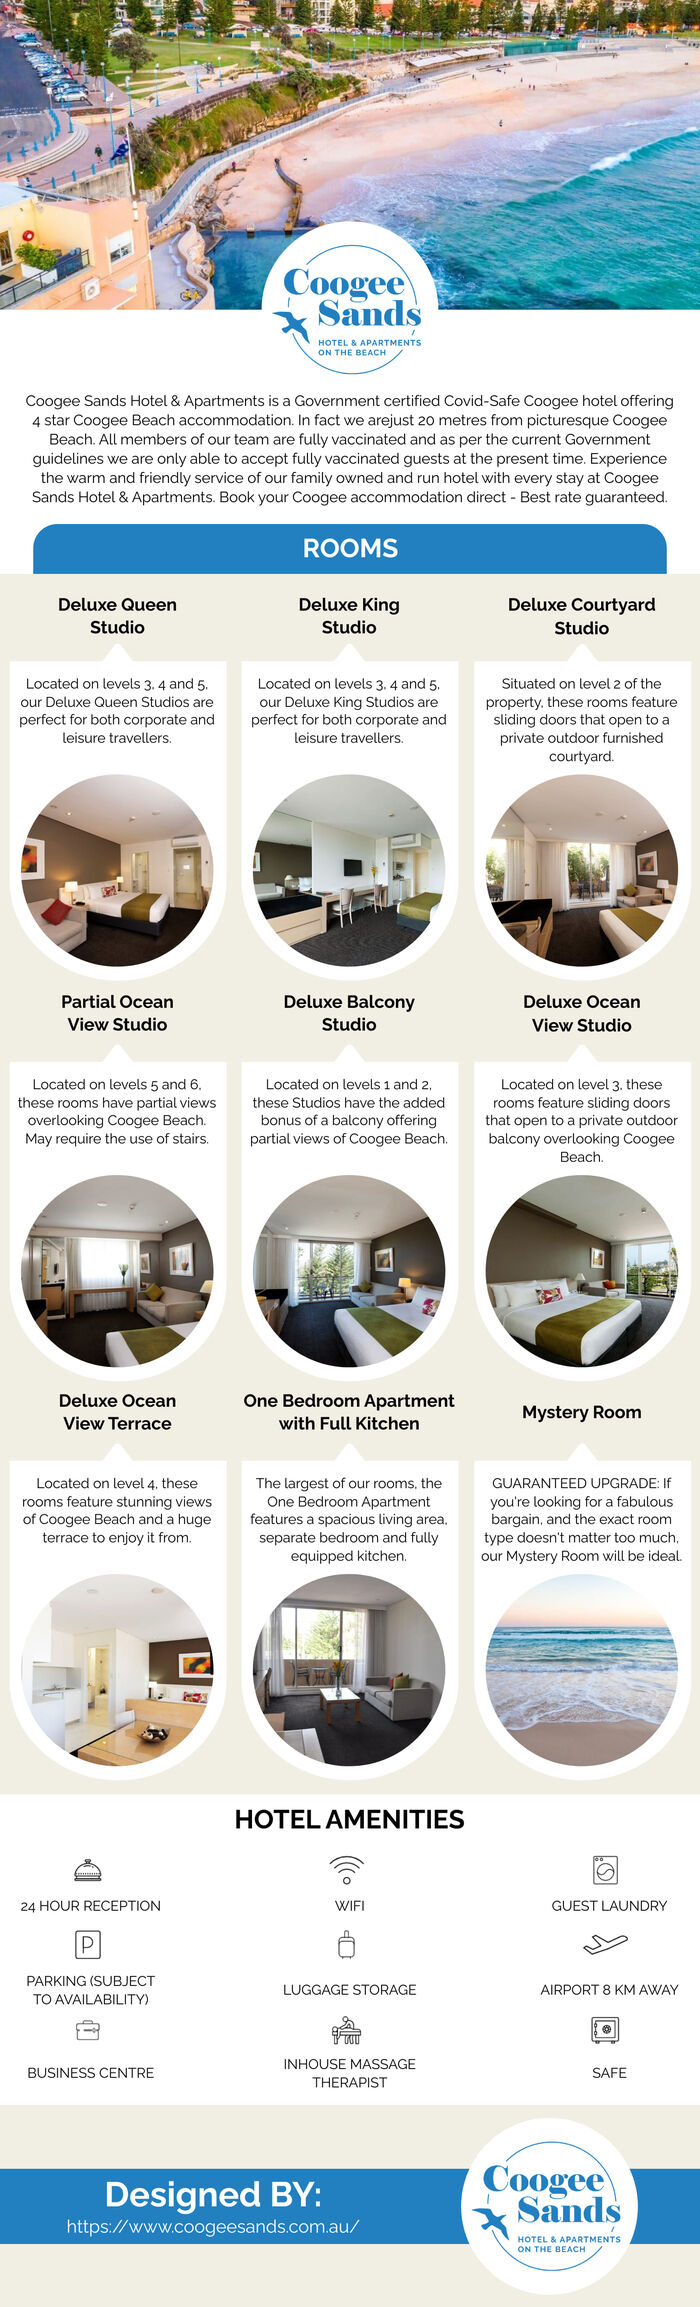 This infographic is designed by Coogee Sands Apartments